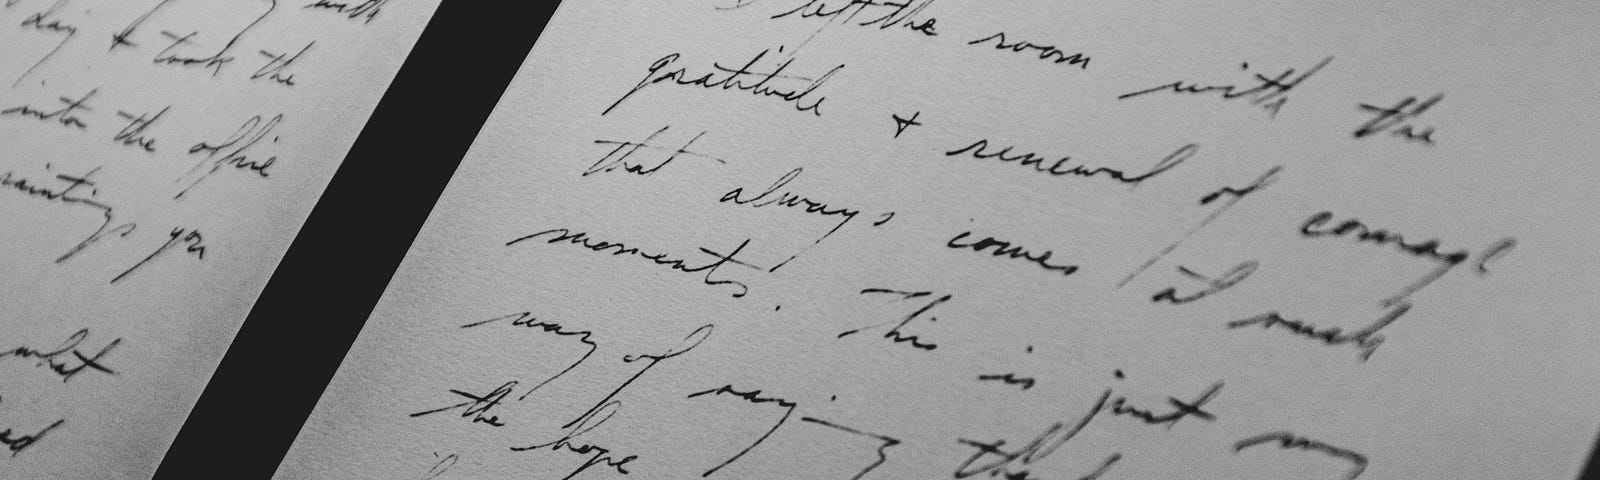 A handwritten letter in black and white, landscape.